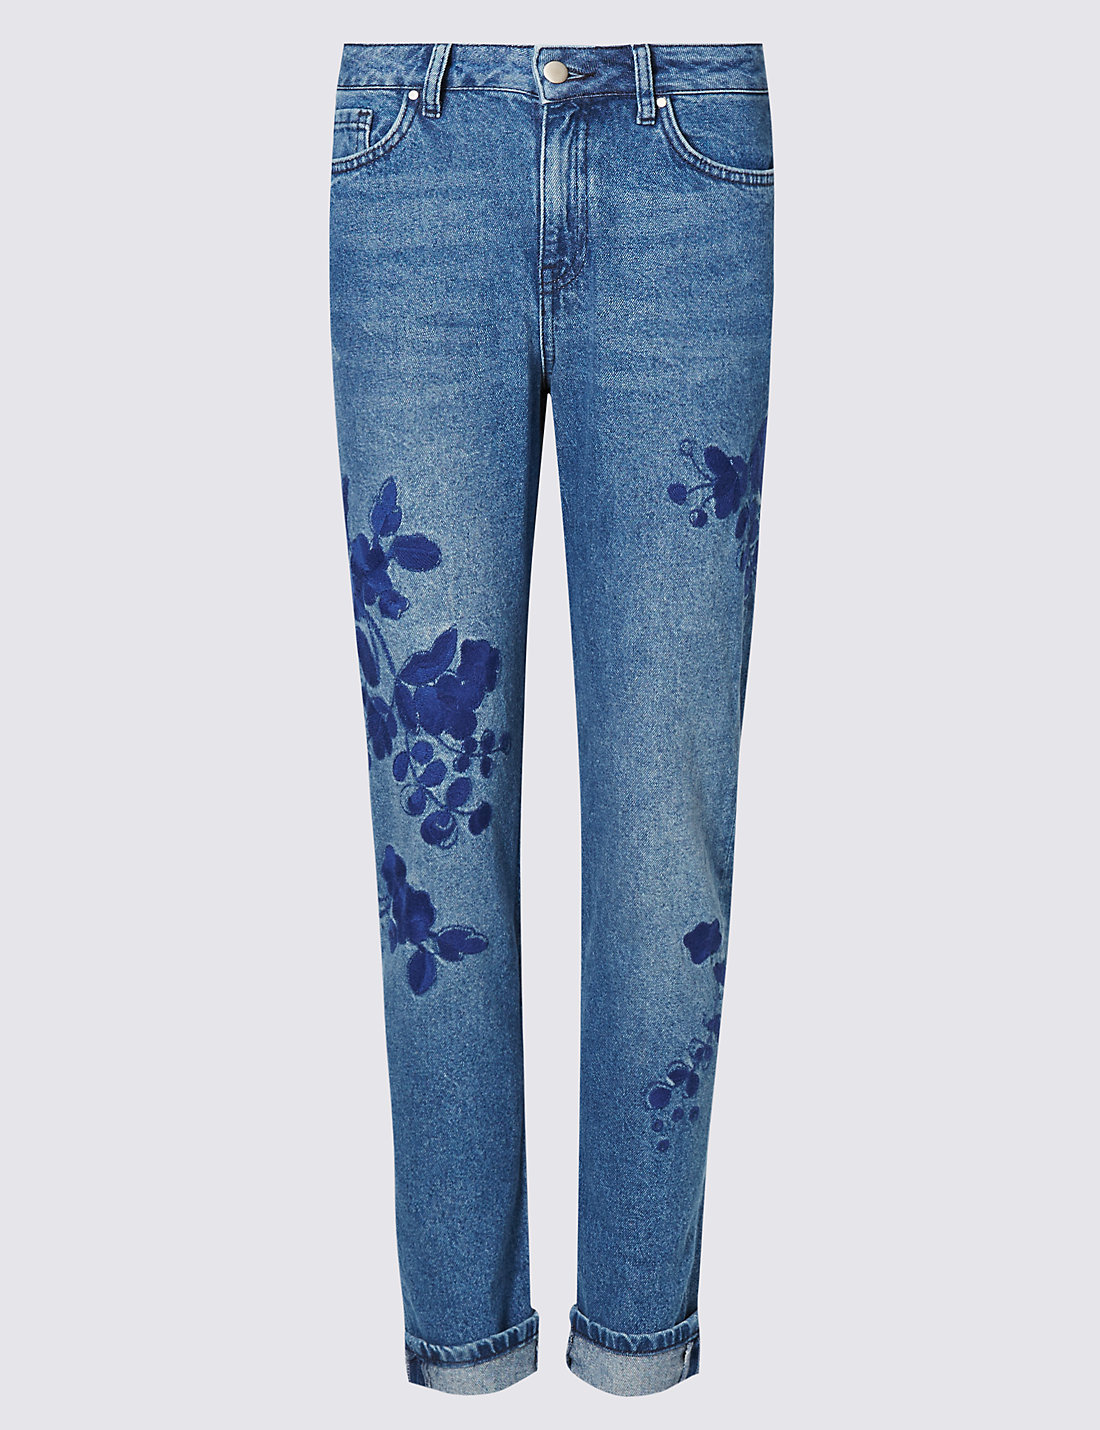 M&S EMbroidered Jeans.jpeg